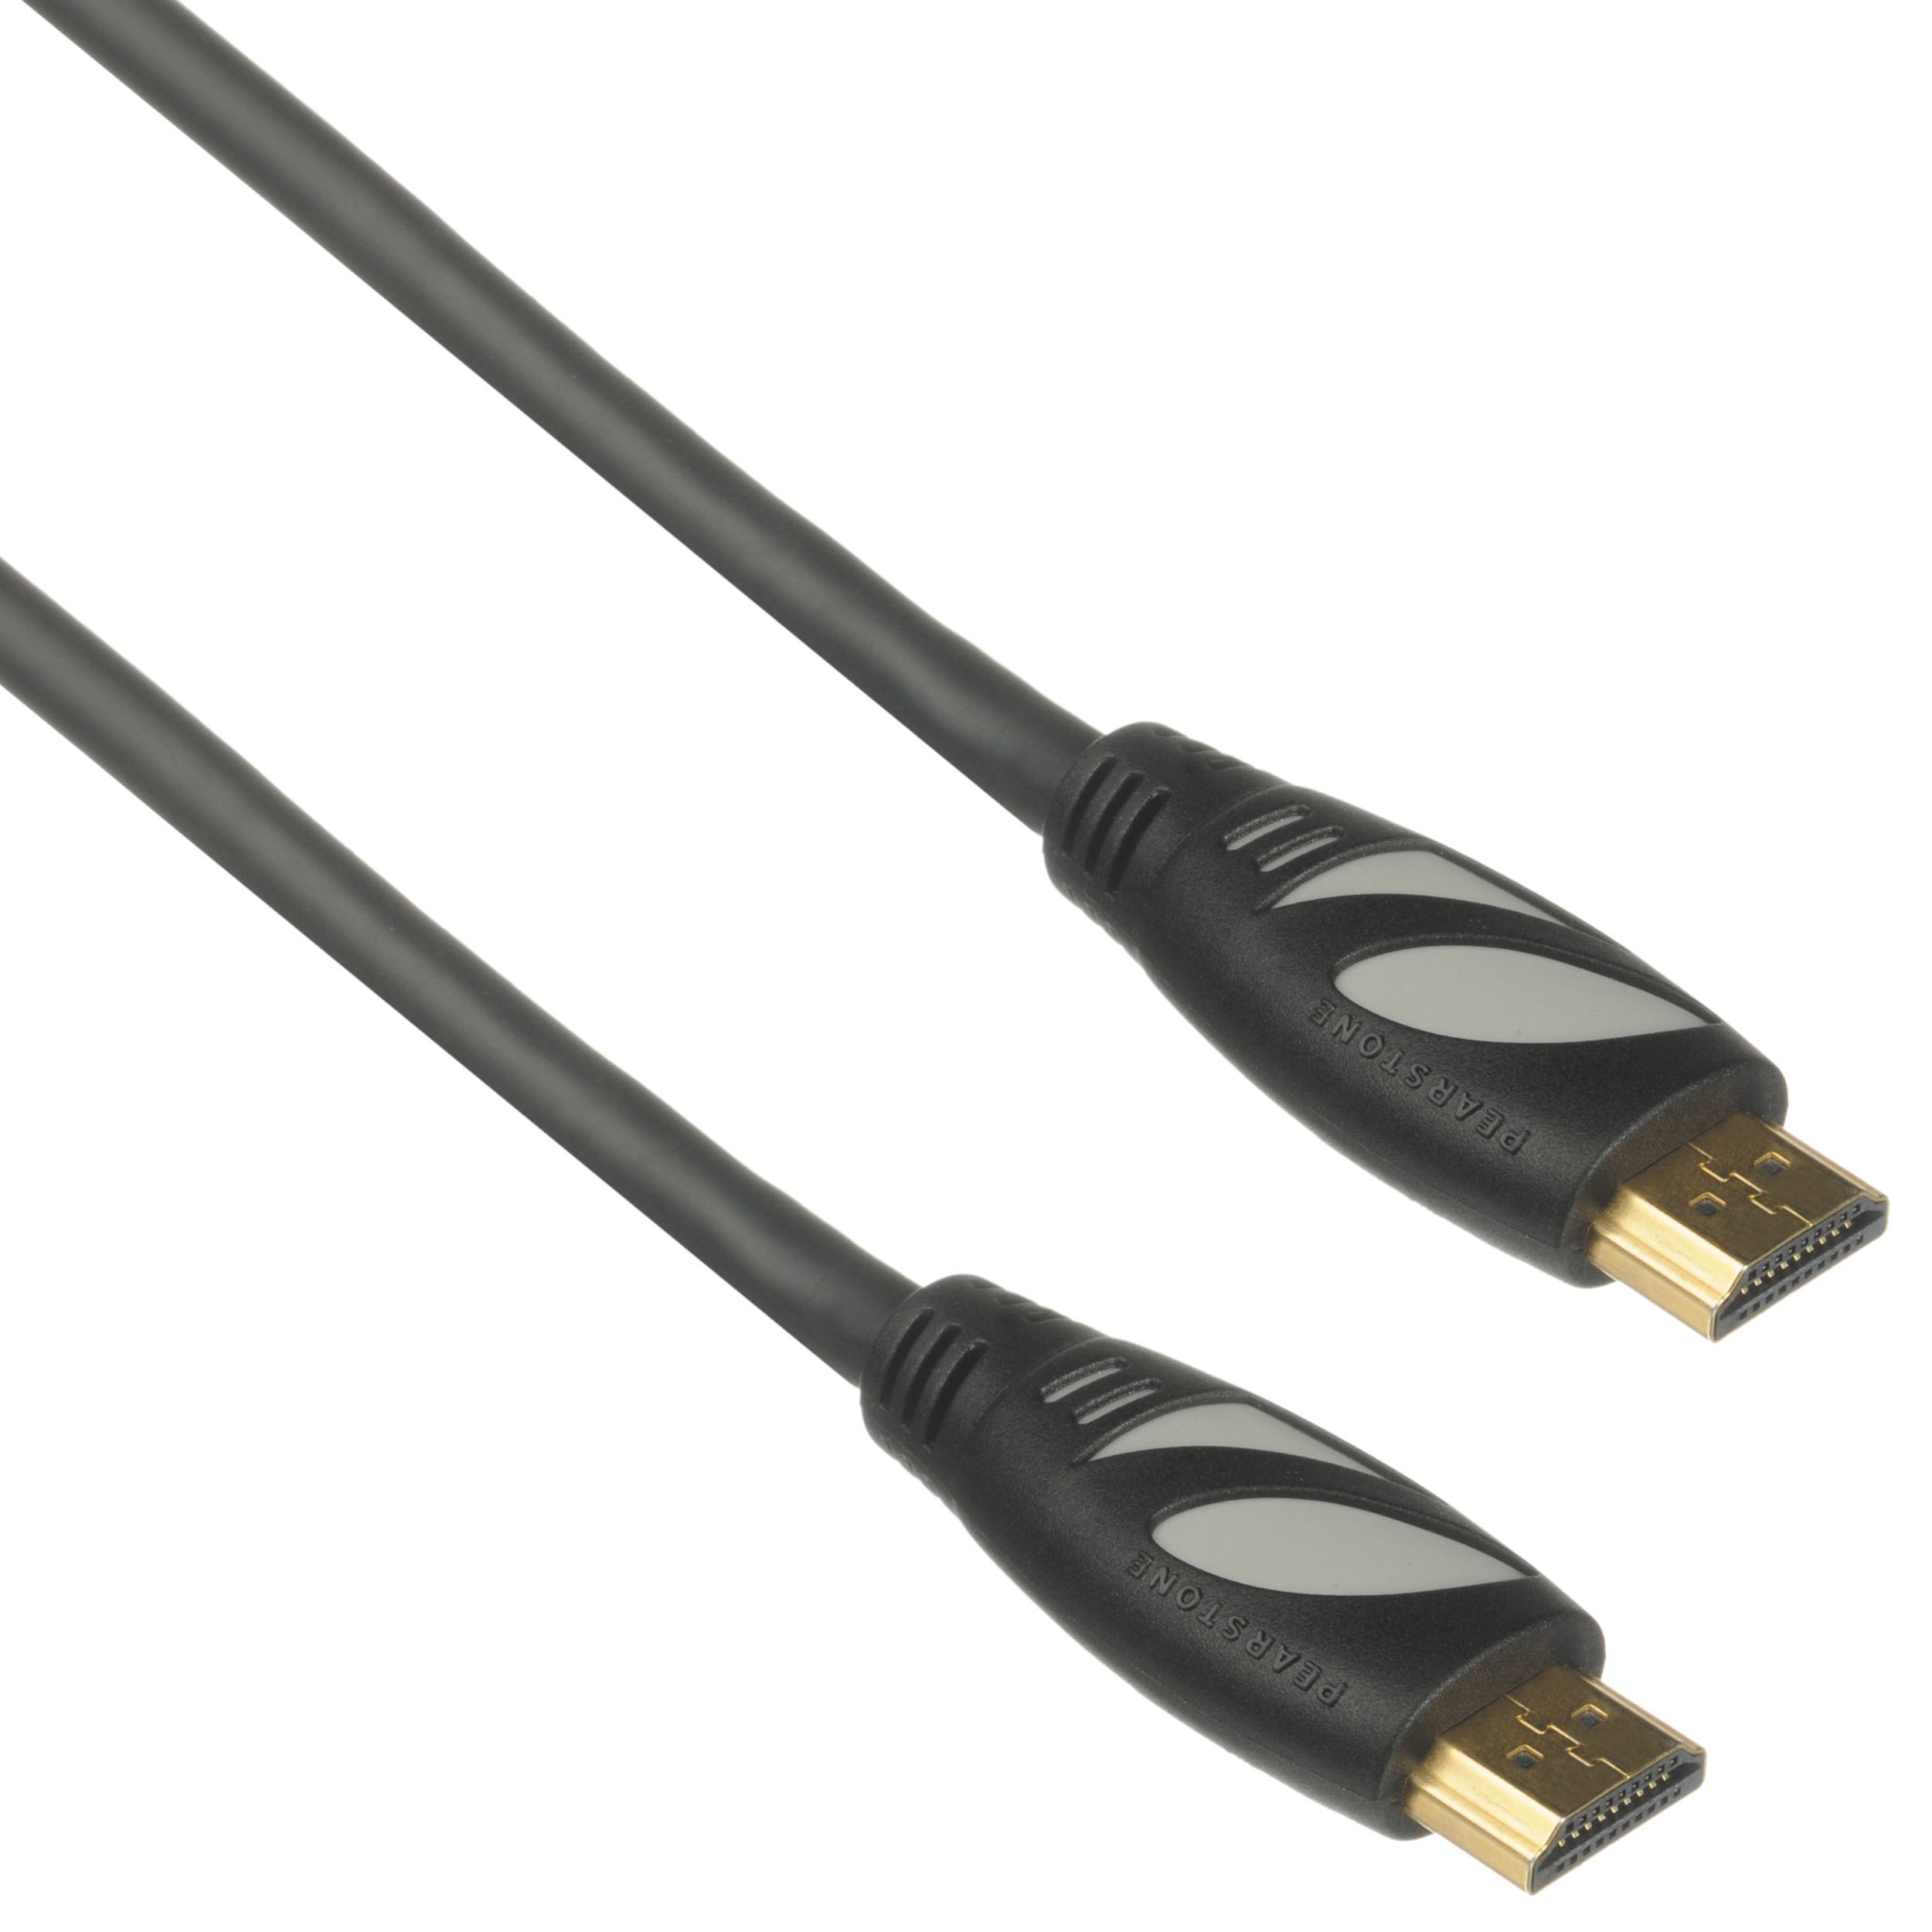 Pearstone HDA-110 High-Speed HDMI Cable with Ethernet (Black, 10')